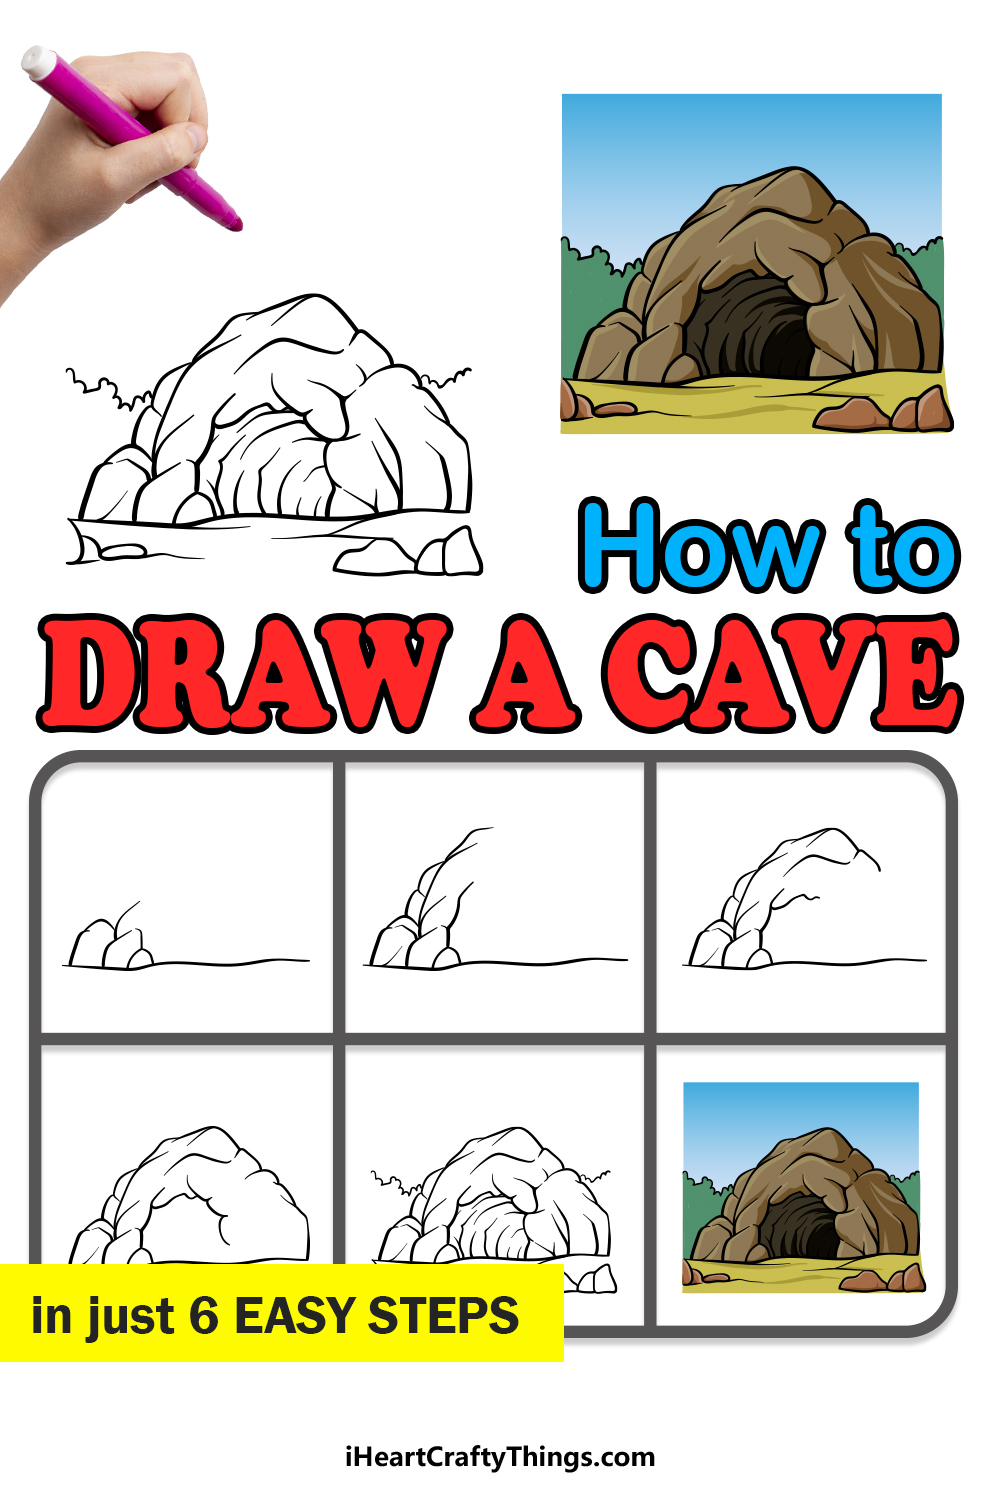 how to draw a cave in 6 easy steps